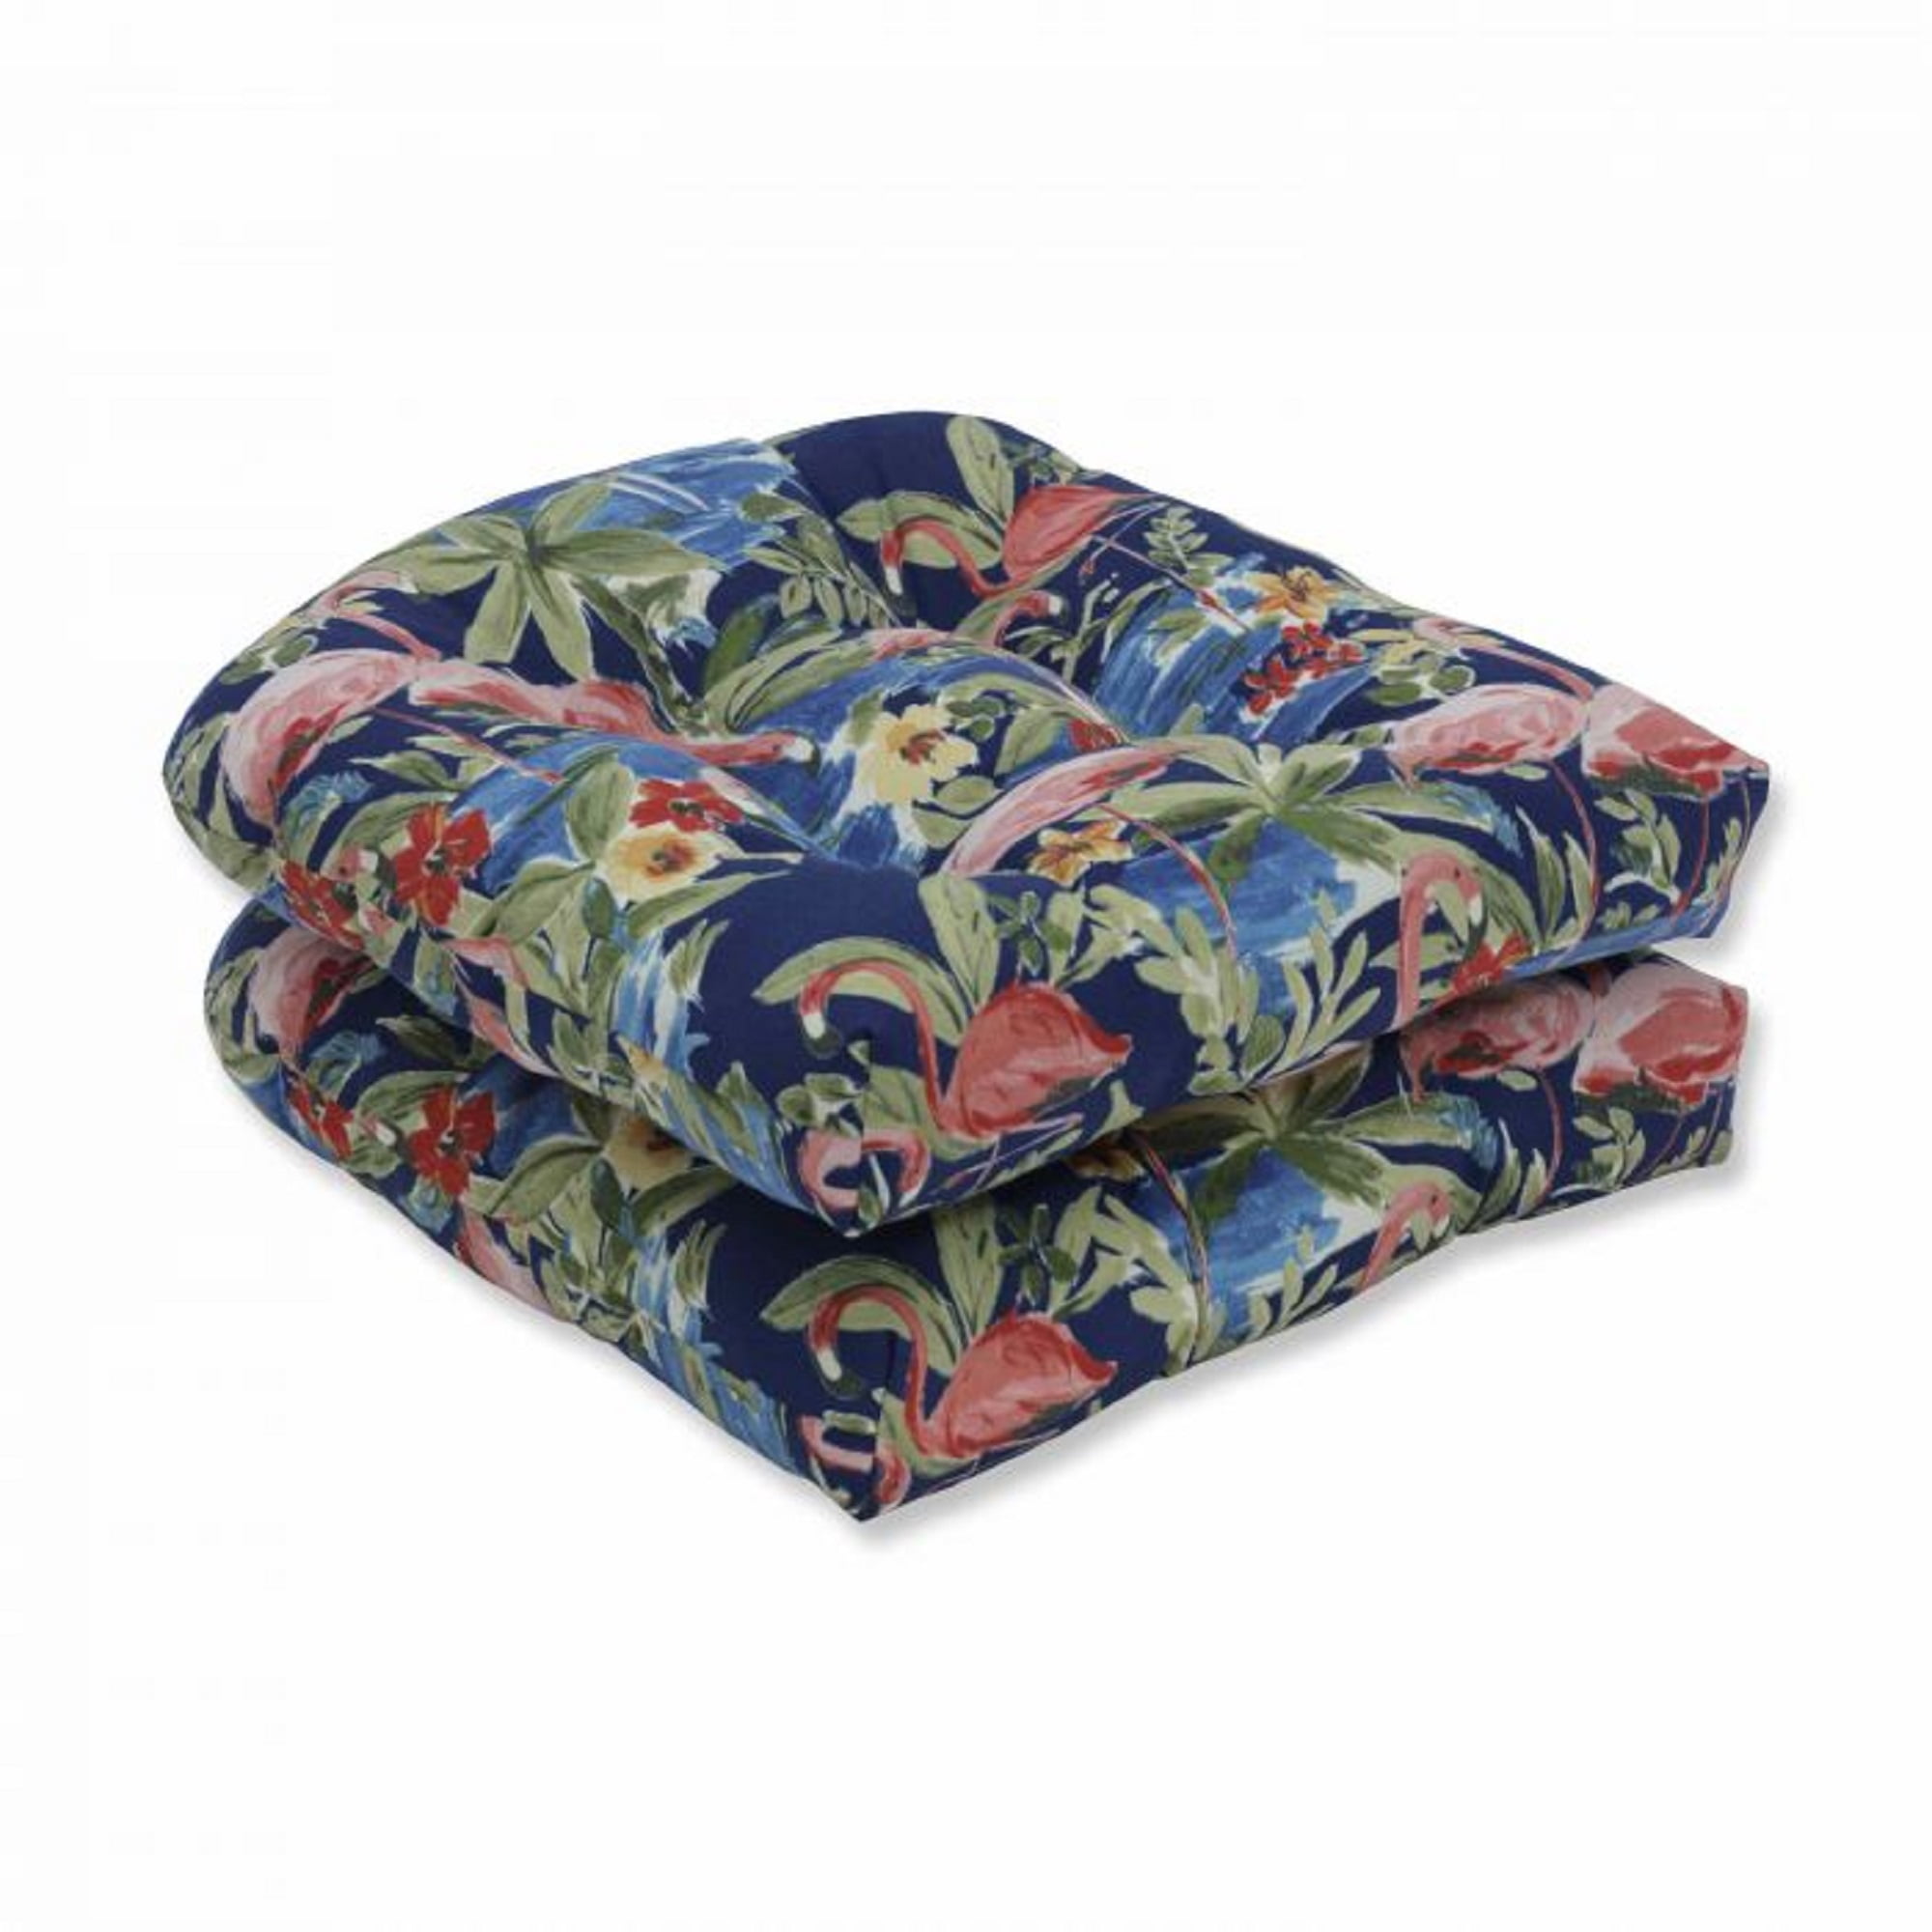 Set of 2 Subtle Colored Floral Pattern Outdoor Patio Wicker Seat